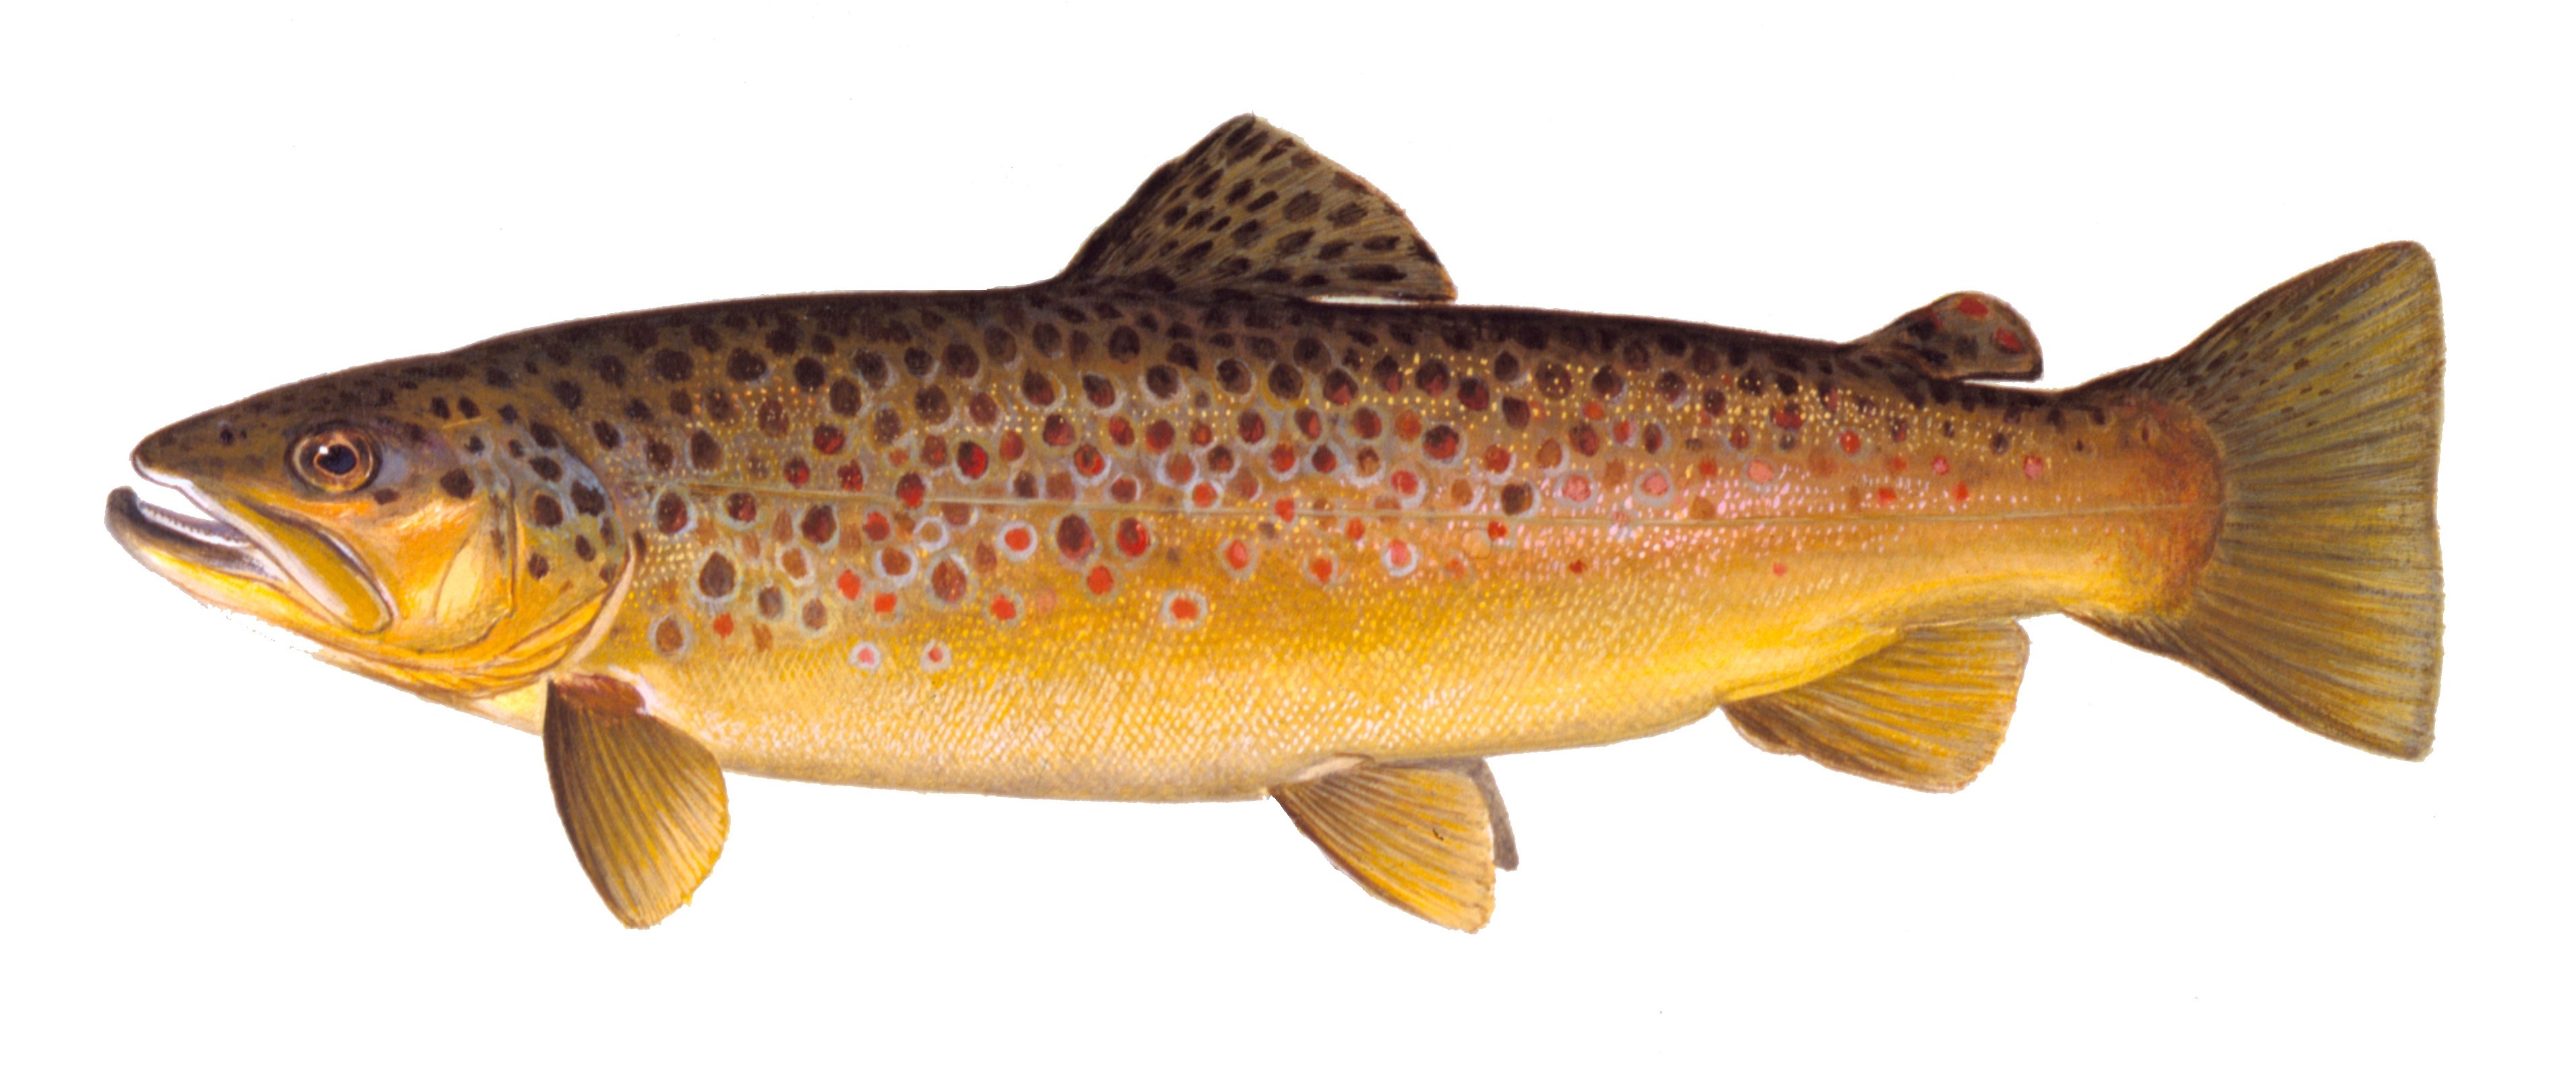 Brown Trout, illustration by Maynard Reece, from Iowa Fish and Fishing.